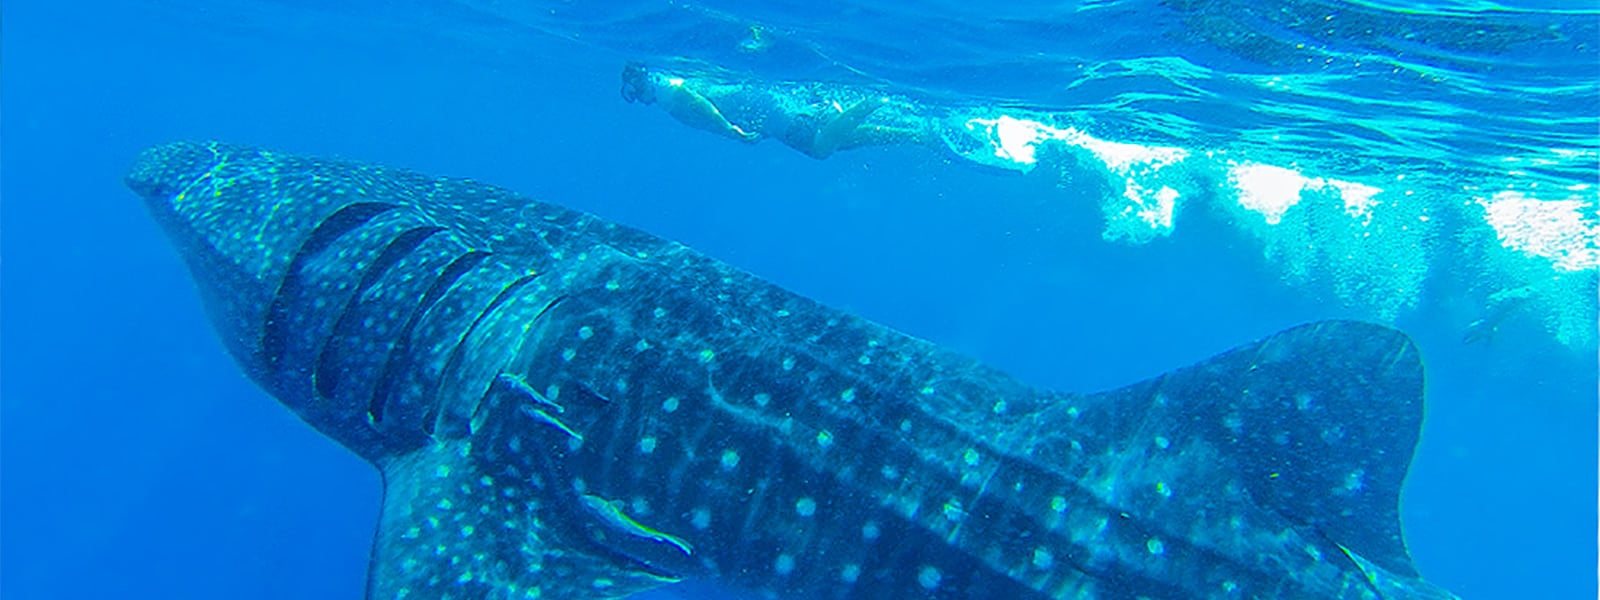 Private whale shark tour in Los Cabos